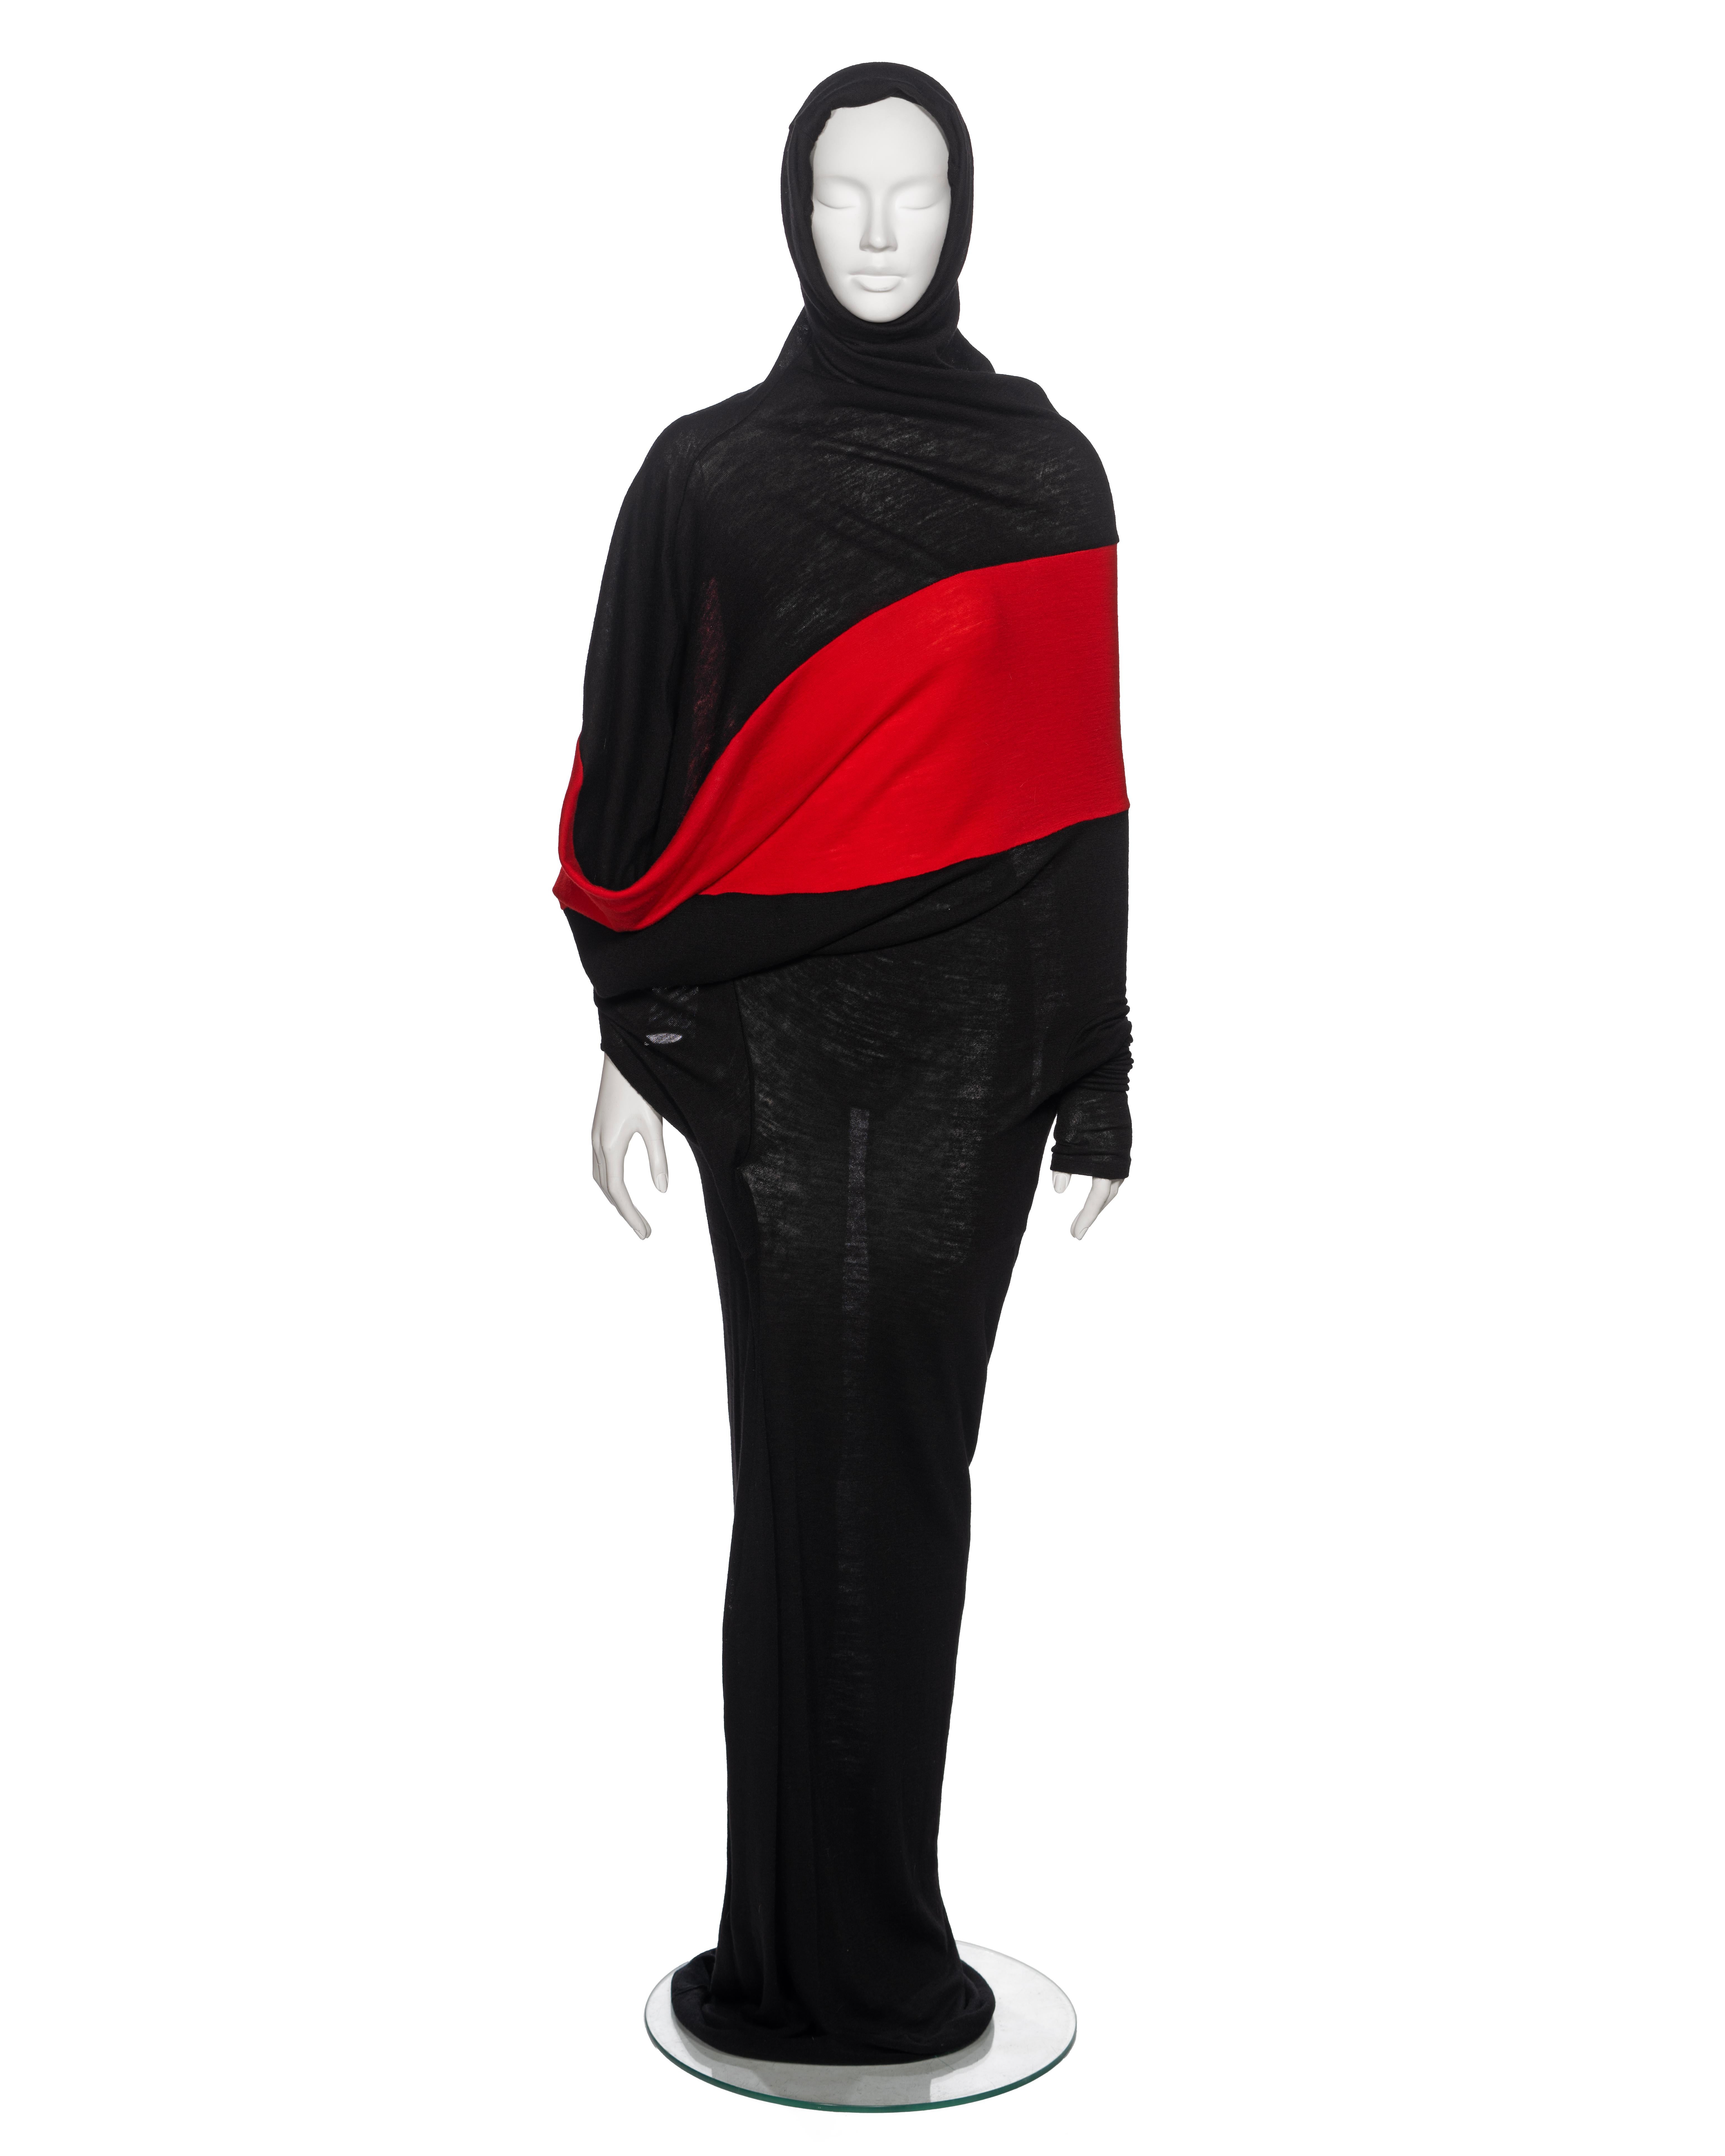 ▪ Yohji Yamamoto Black and Red Wool Asymmetric Convertible Maxi Dress
▪ Fall-Winter 2012 
▪ Sold by One of a Kind Archive 
▪ Crafted from high-quality fine wool jersey
▪ A striking contrasting red panel runs horizontally around the bodice
▪ The